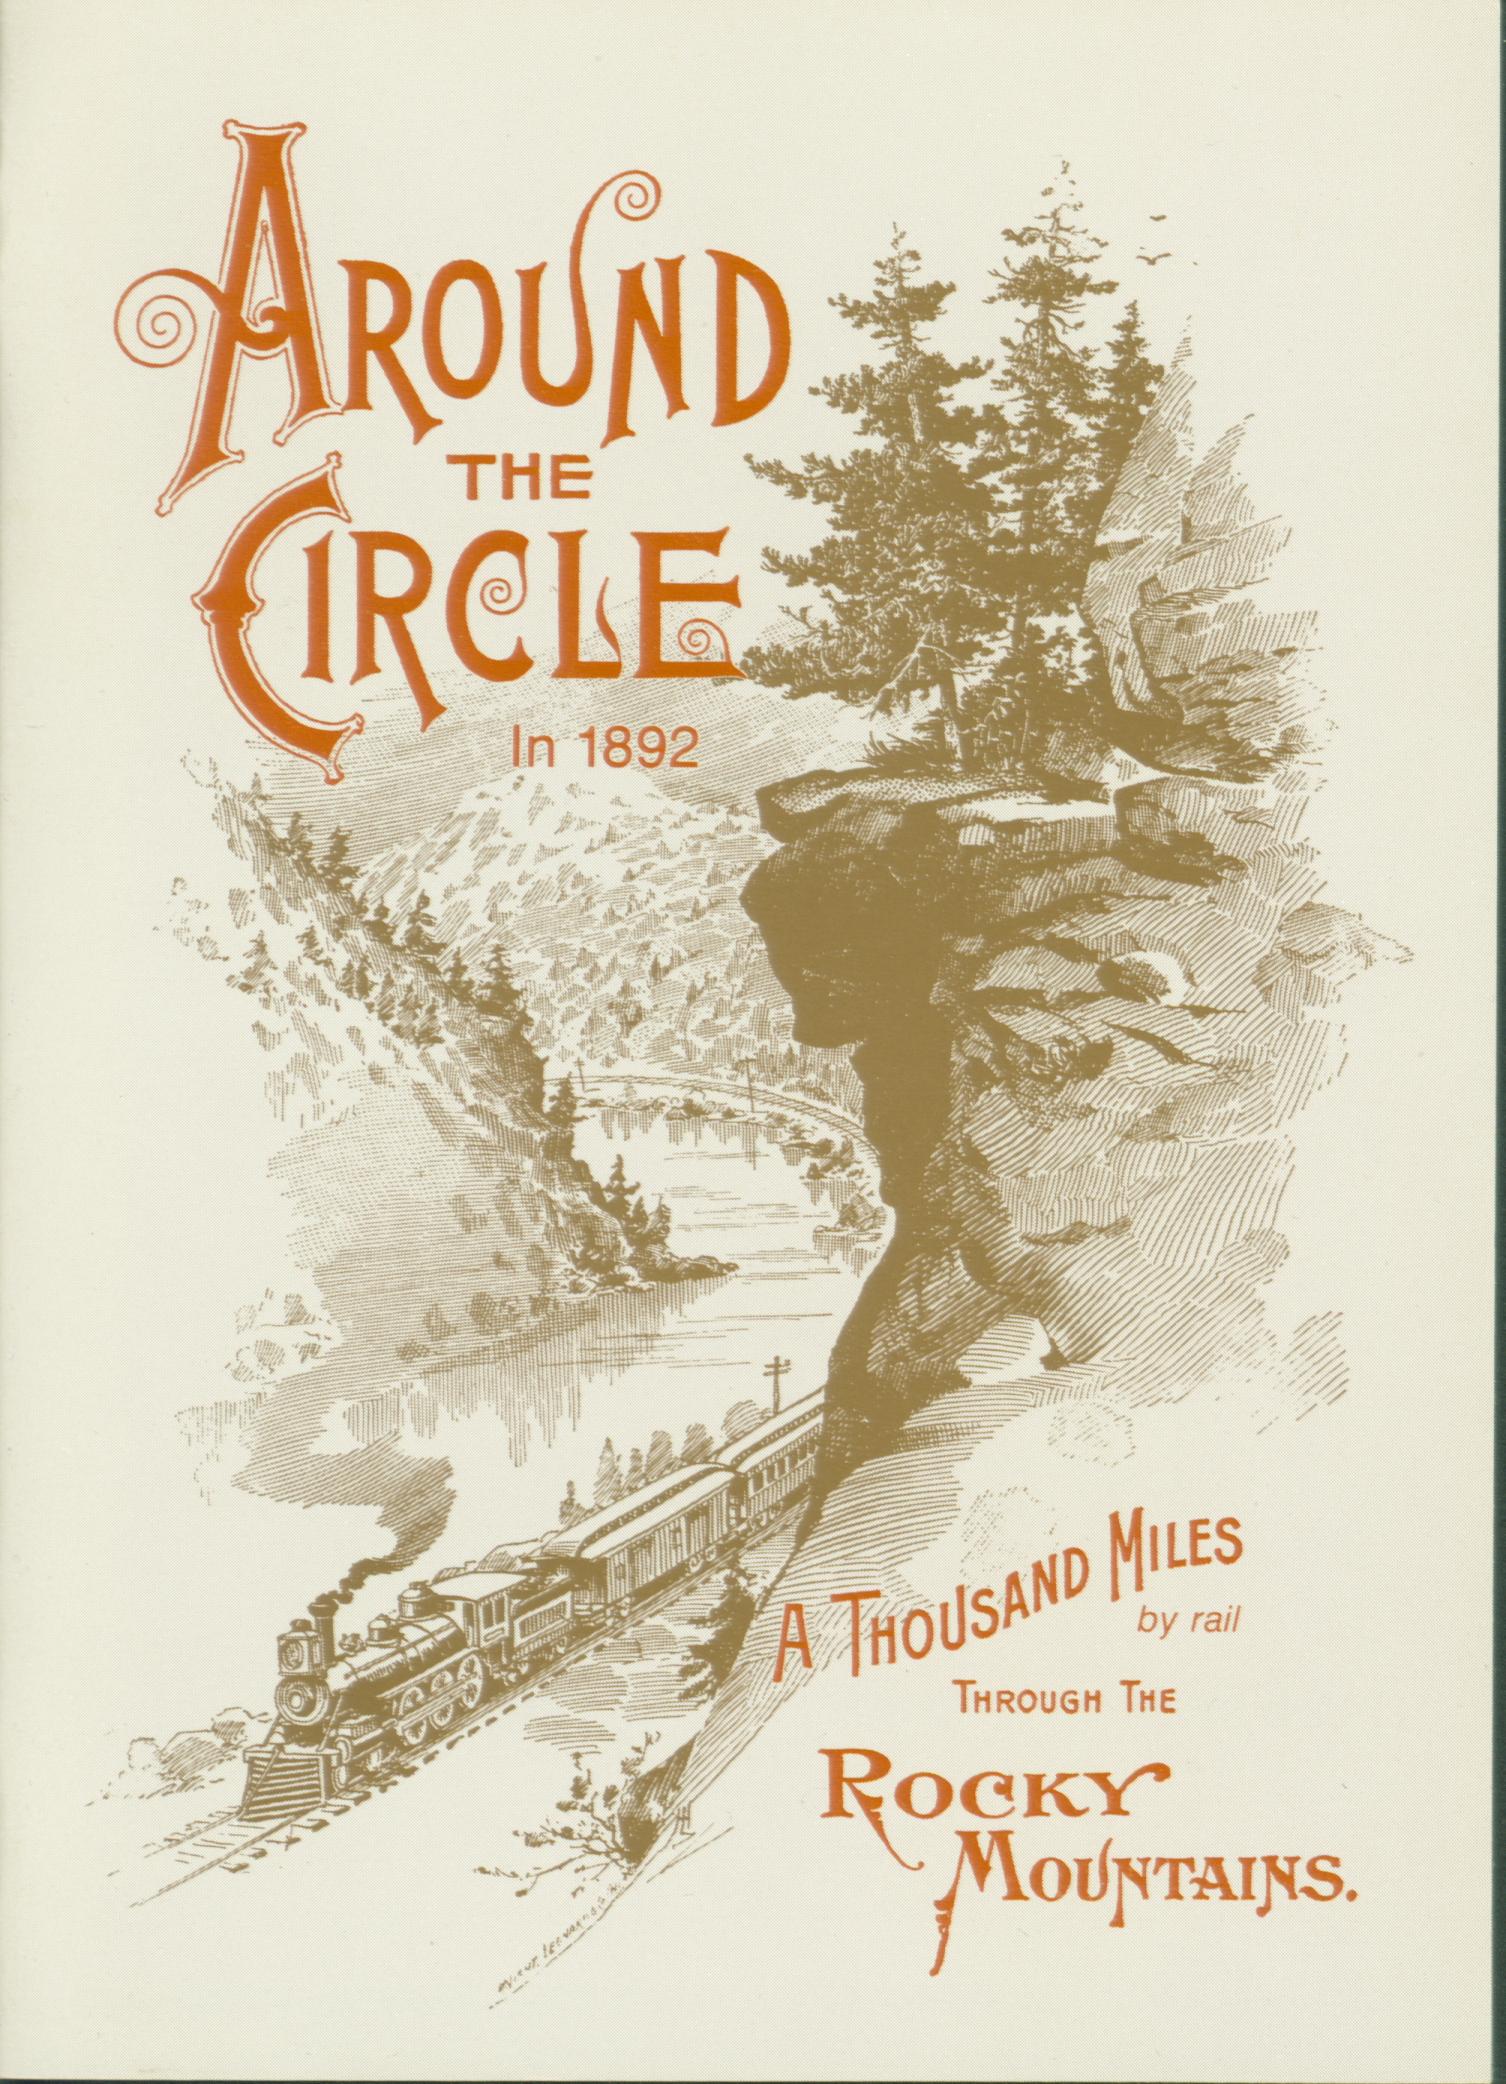 AROUND THE CIRCLE in 1892--a thousand miles by rail through the Rocky Mountains (CO). 